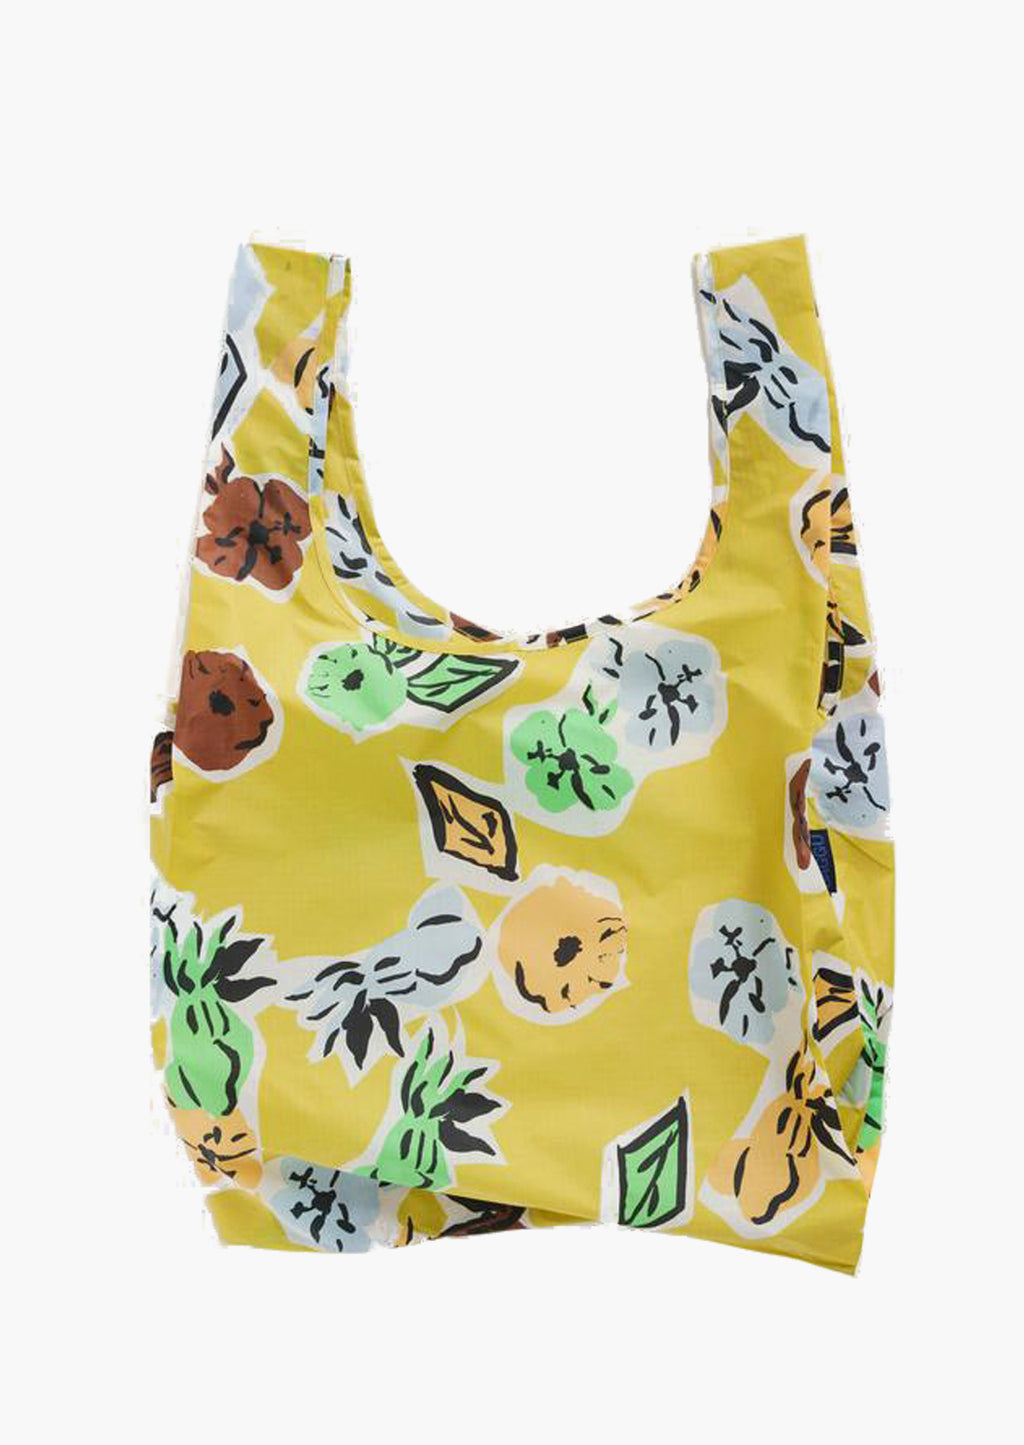 Paper Floral: A reusable nylon bag in yellow floral print.